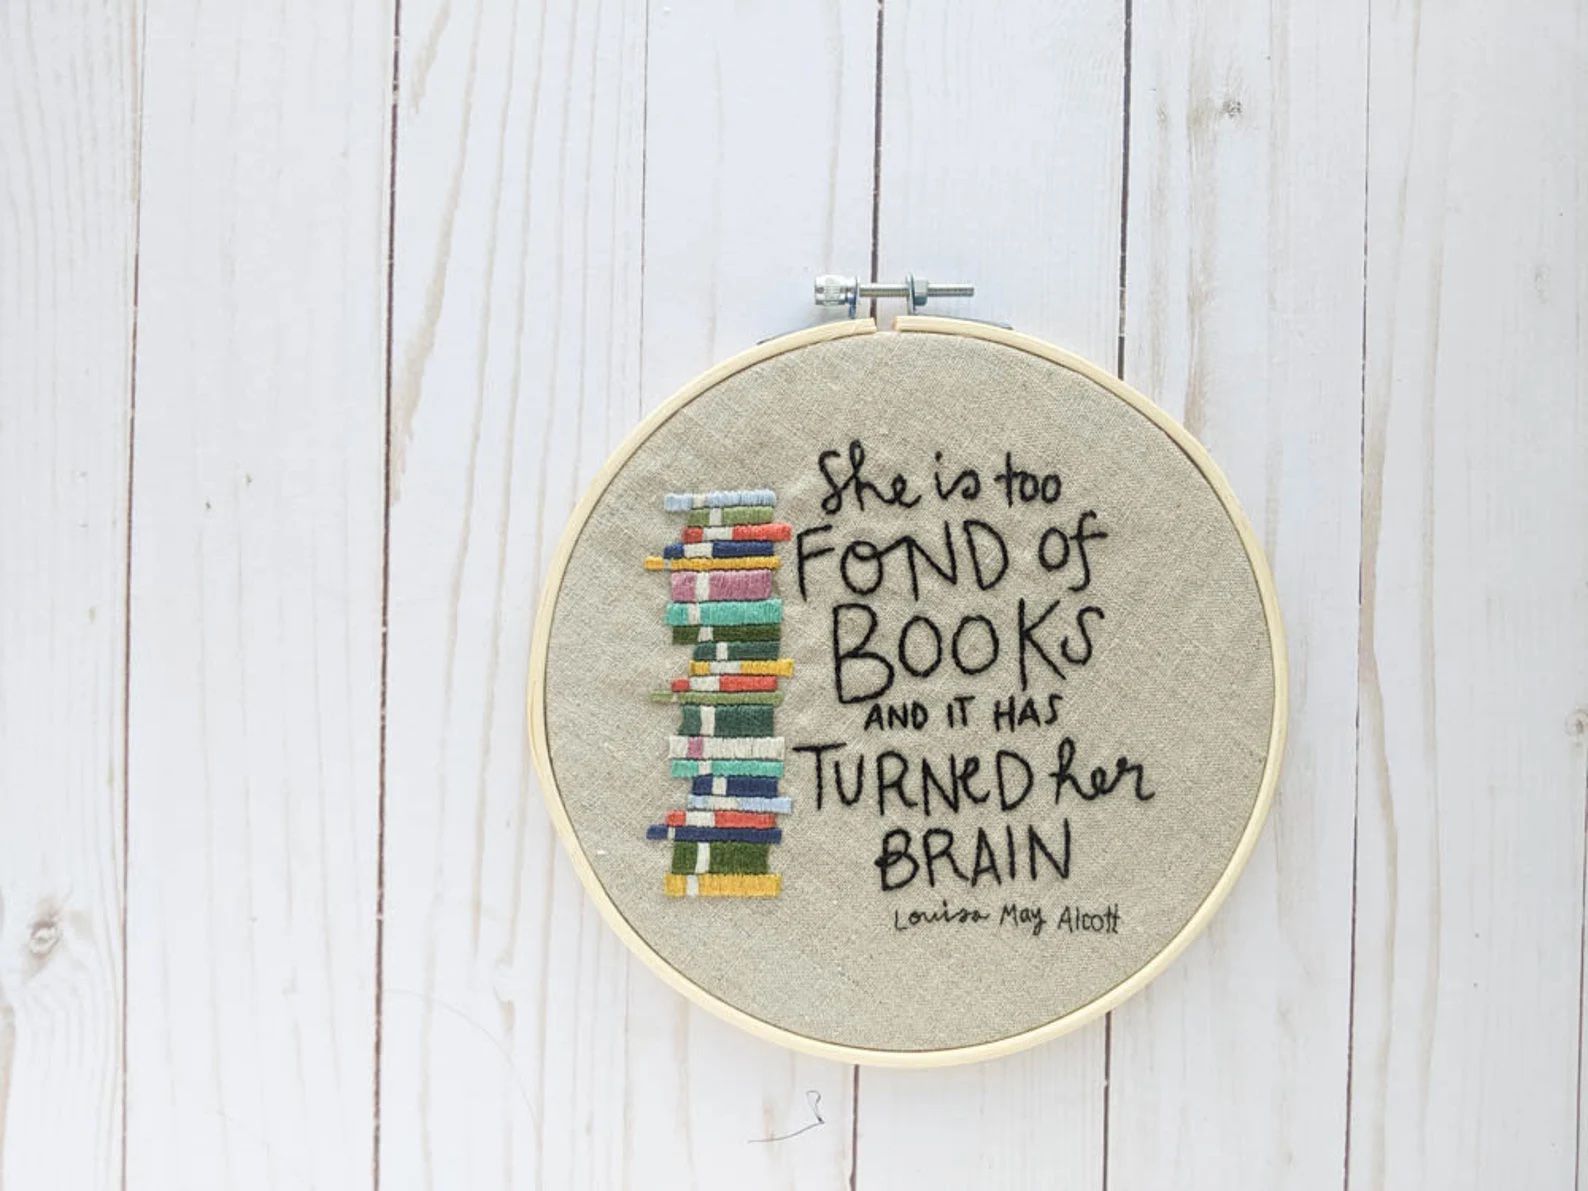 louisa may alcott quote embroidery